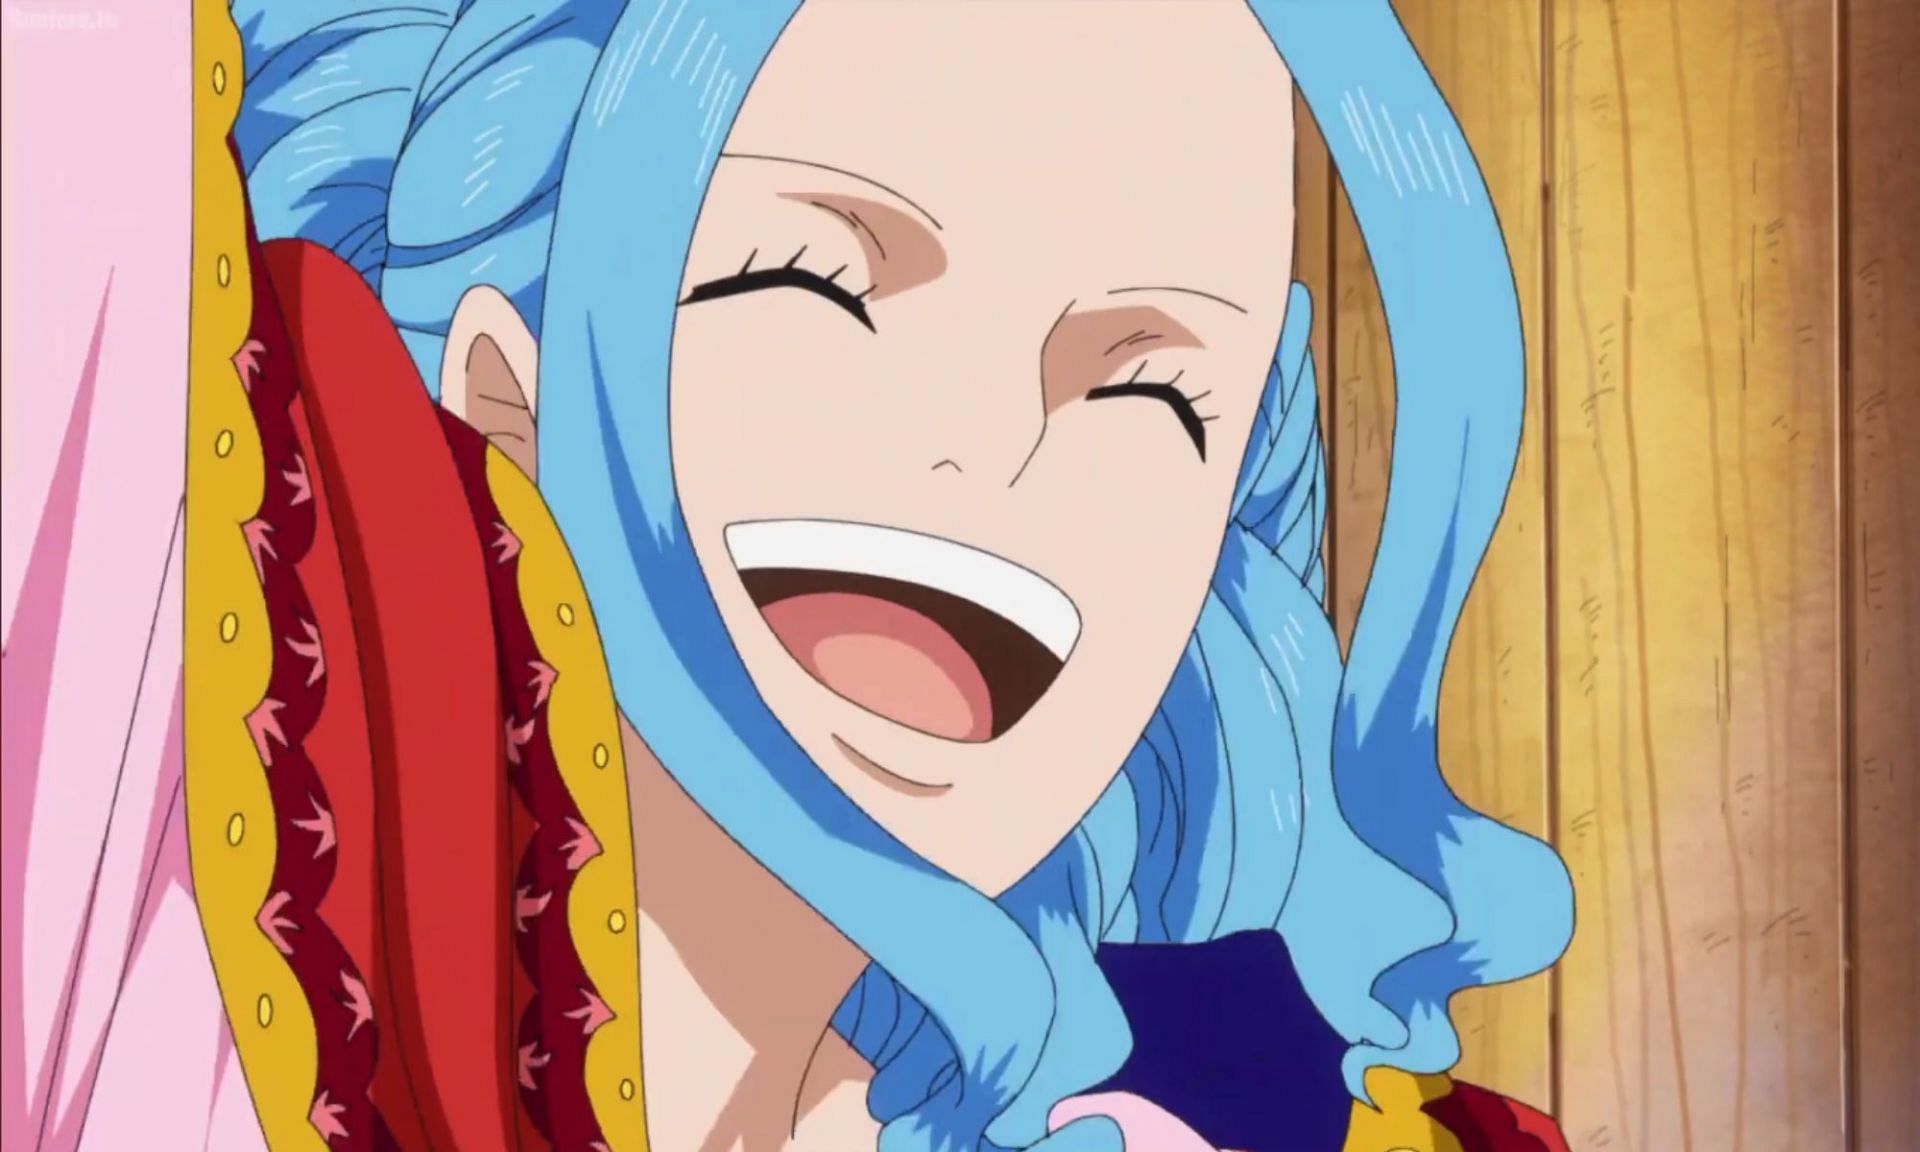 Princess Vivi was an honorary member of the Straw Hat Pirates (Image via Toei Animation)